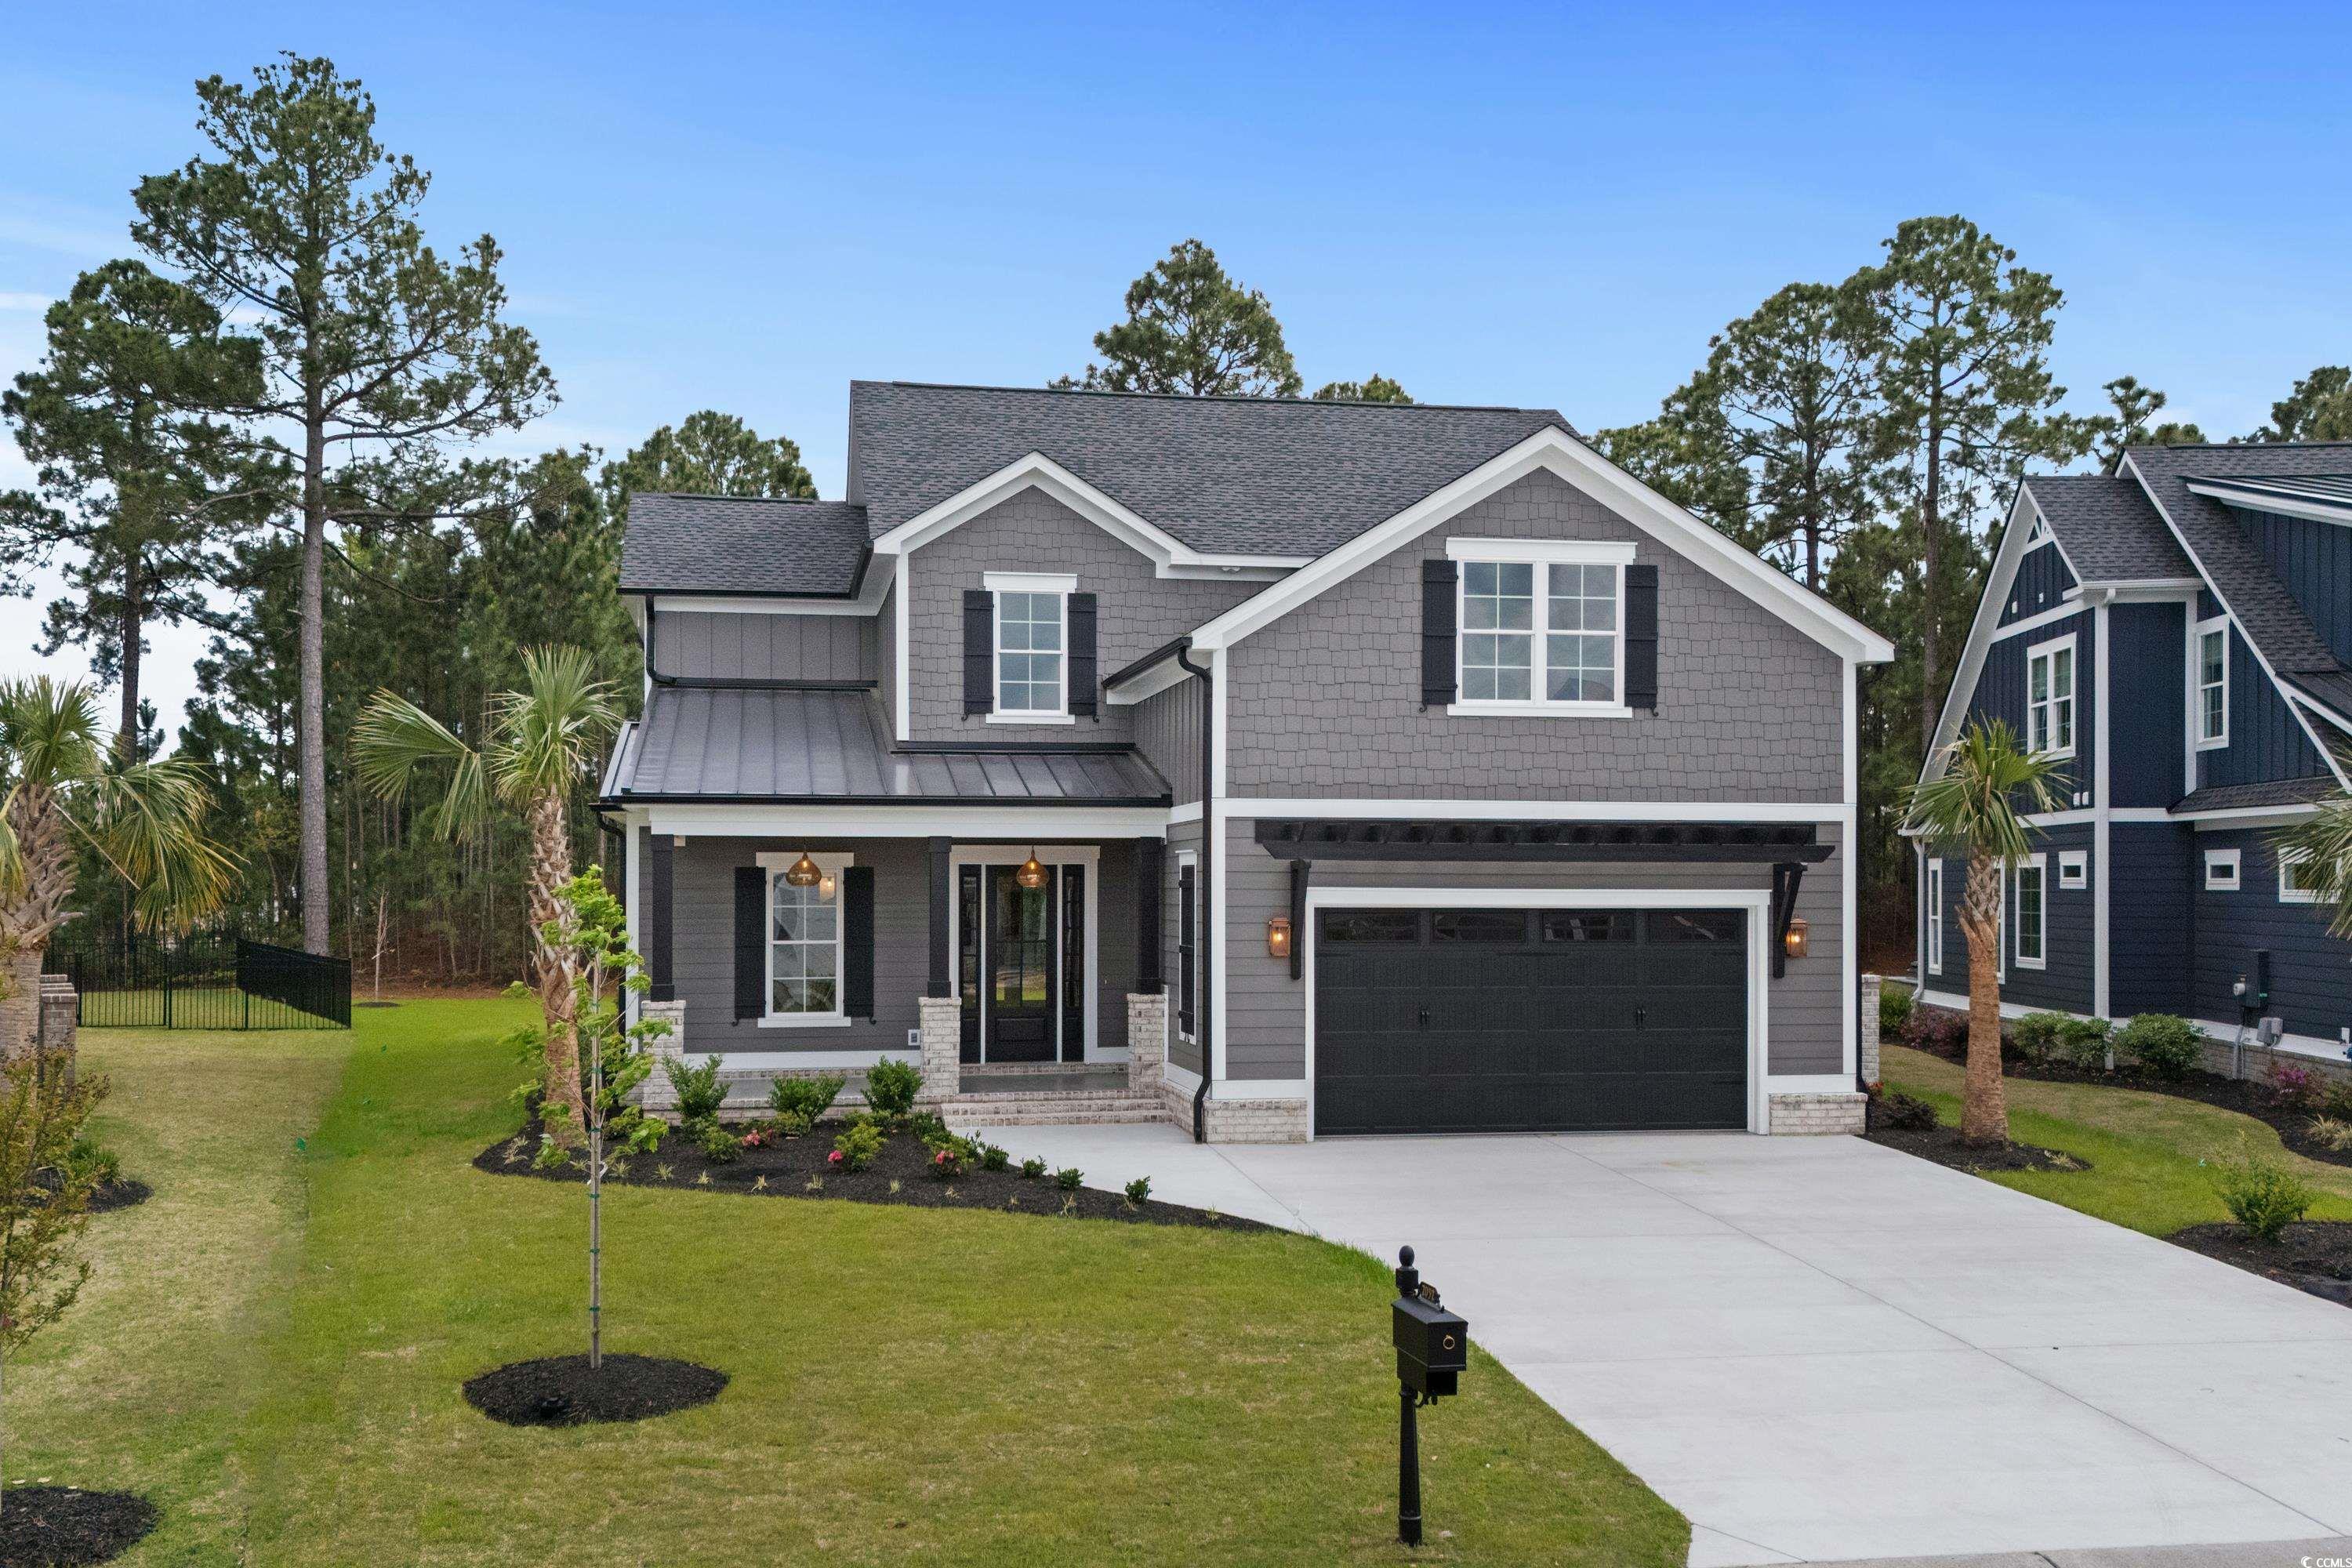 discover your dream home at 2052 summer rose lane, myrtle beach, sc 29579, perfectly situated in the prestigious waterbridge community within carolina forest—myrtle beach's rapidly expanding area. this newly constructed marvel offers 3,640 sq ft of heated living area and a total of 4,603 sq ft, marrying modern sophistication with traditional southern elegance. the main level showcases a splendid master suite with beam ceilings and a luxurious bathroom featuring a floor-to-ceiling tiled shower. this level also hosts an additional bedroom, a home office, and a chef's dream kitchen with custom cabinets, a unique range hood, wall oven with convection microwave, slide-in gas range, and an additional electric stove. a bar area with a beverage center rounds out the culinary space. upstairs, find three more bedrooms, a versatile bonus room, a flex room, and ample attic storage. the home is adorned with engineered hardwood floors throughout and tile in all wet areas, reflecting its quality and style. the convenience is further enhanced by a spacious laundry room with extensive cabinets and an oversized two-car garage with epoxy flooring. living in waterbridge affords access to top-tier amenities, including south carolina's second-largest residential pool, lazy rivers, tennis and volleyball courts, pickleball, a well-equipped gym, and a 60-acre freshwater lake. embrace unparalleled living in the heart of myrtle beach at 2052 summer rose lane—your ultimate forever home.